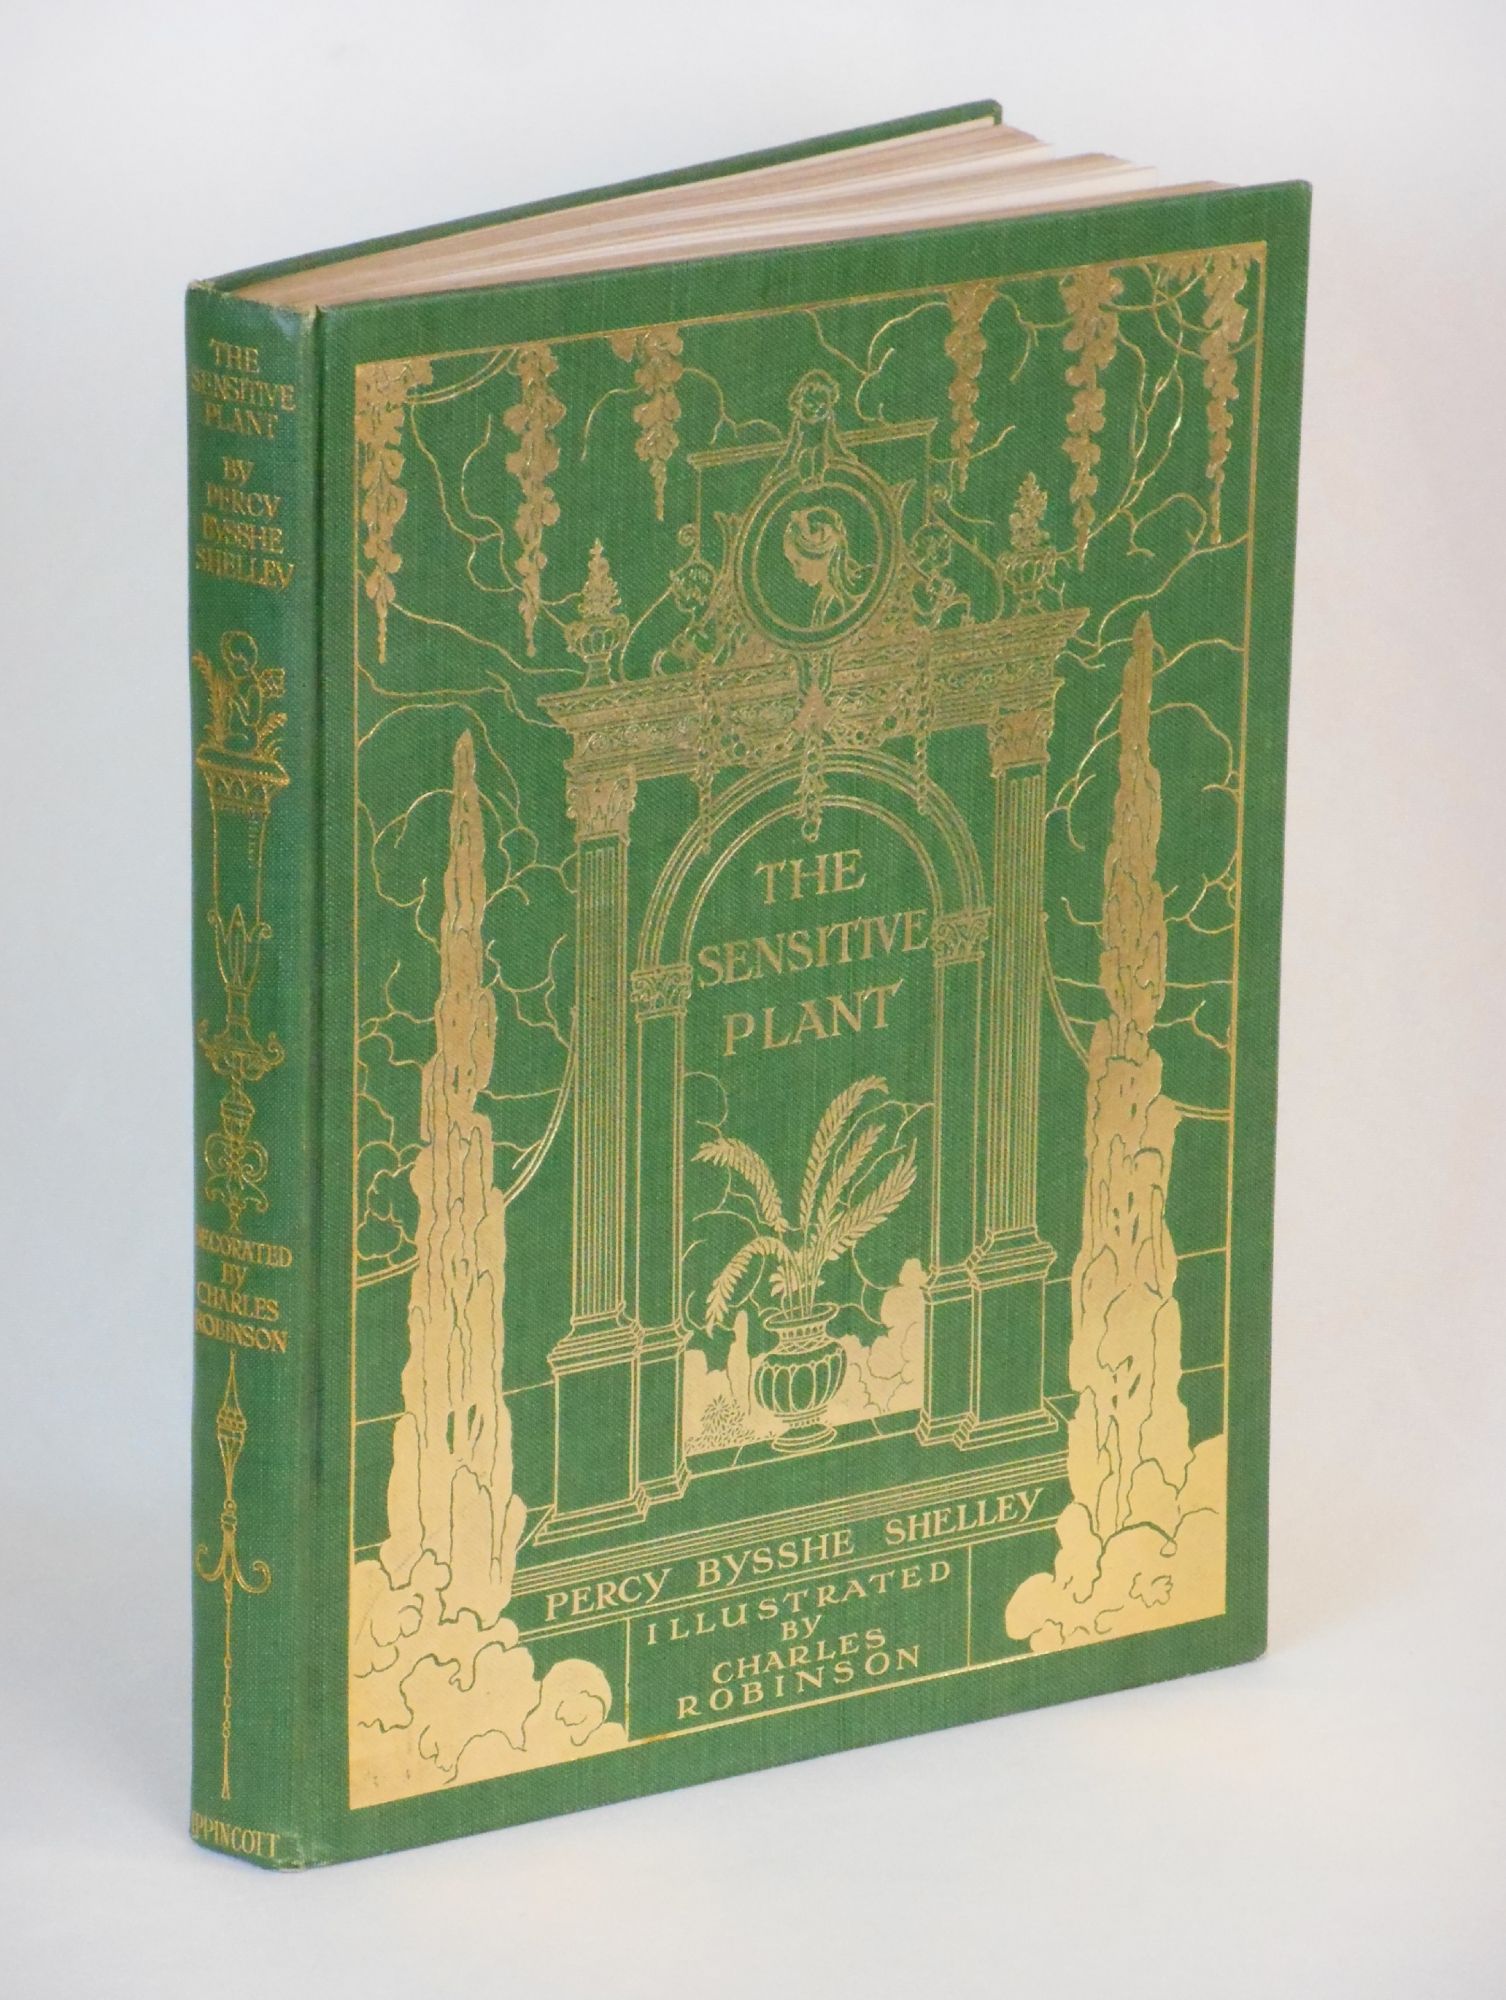 The Sensitive Plant by Percy Bysshe; Robinson, Charles (Illustrator); Gosse, Edmund (Introduction): Near fine Hardcover (1911) Trade Swan's Fine Books, ABAA, ILAB, IOBA